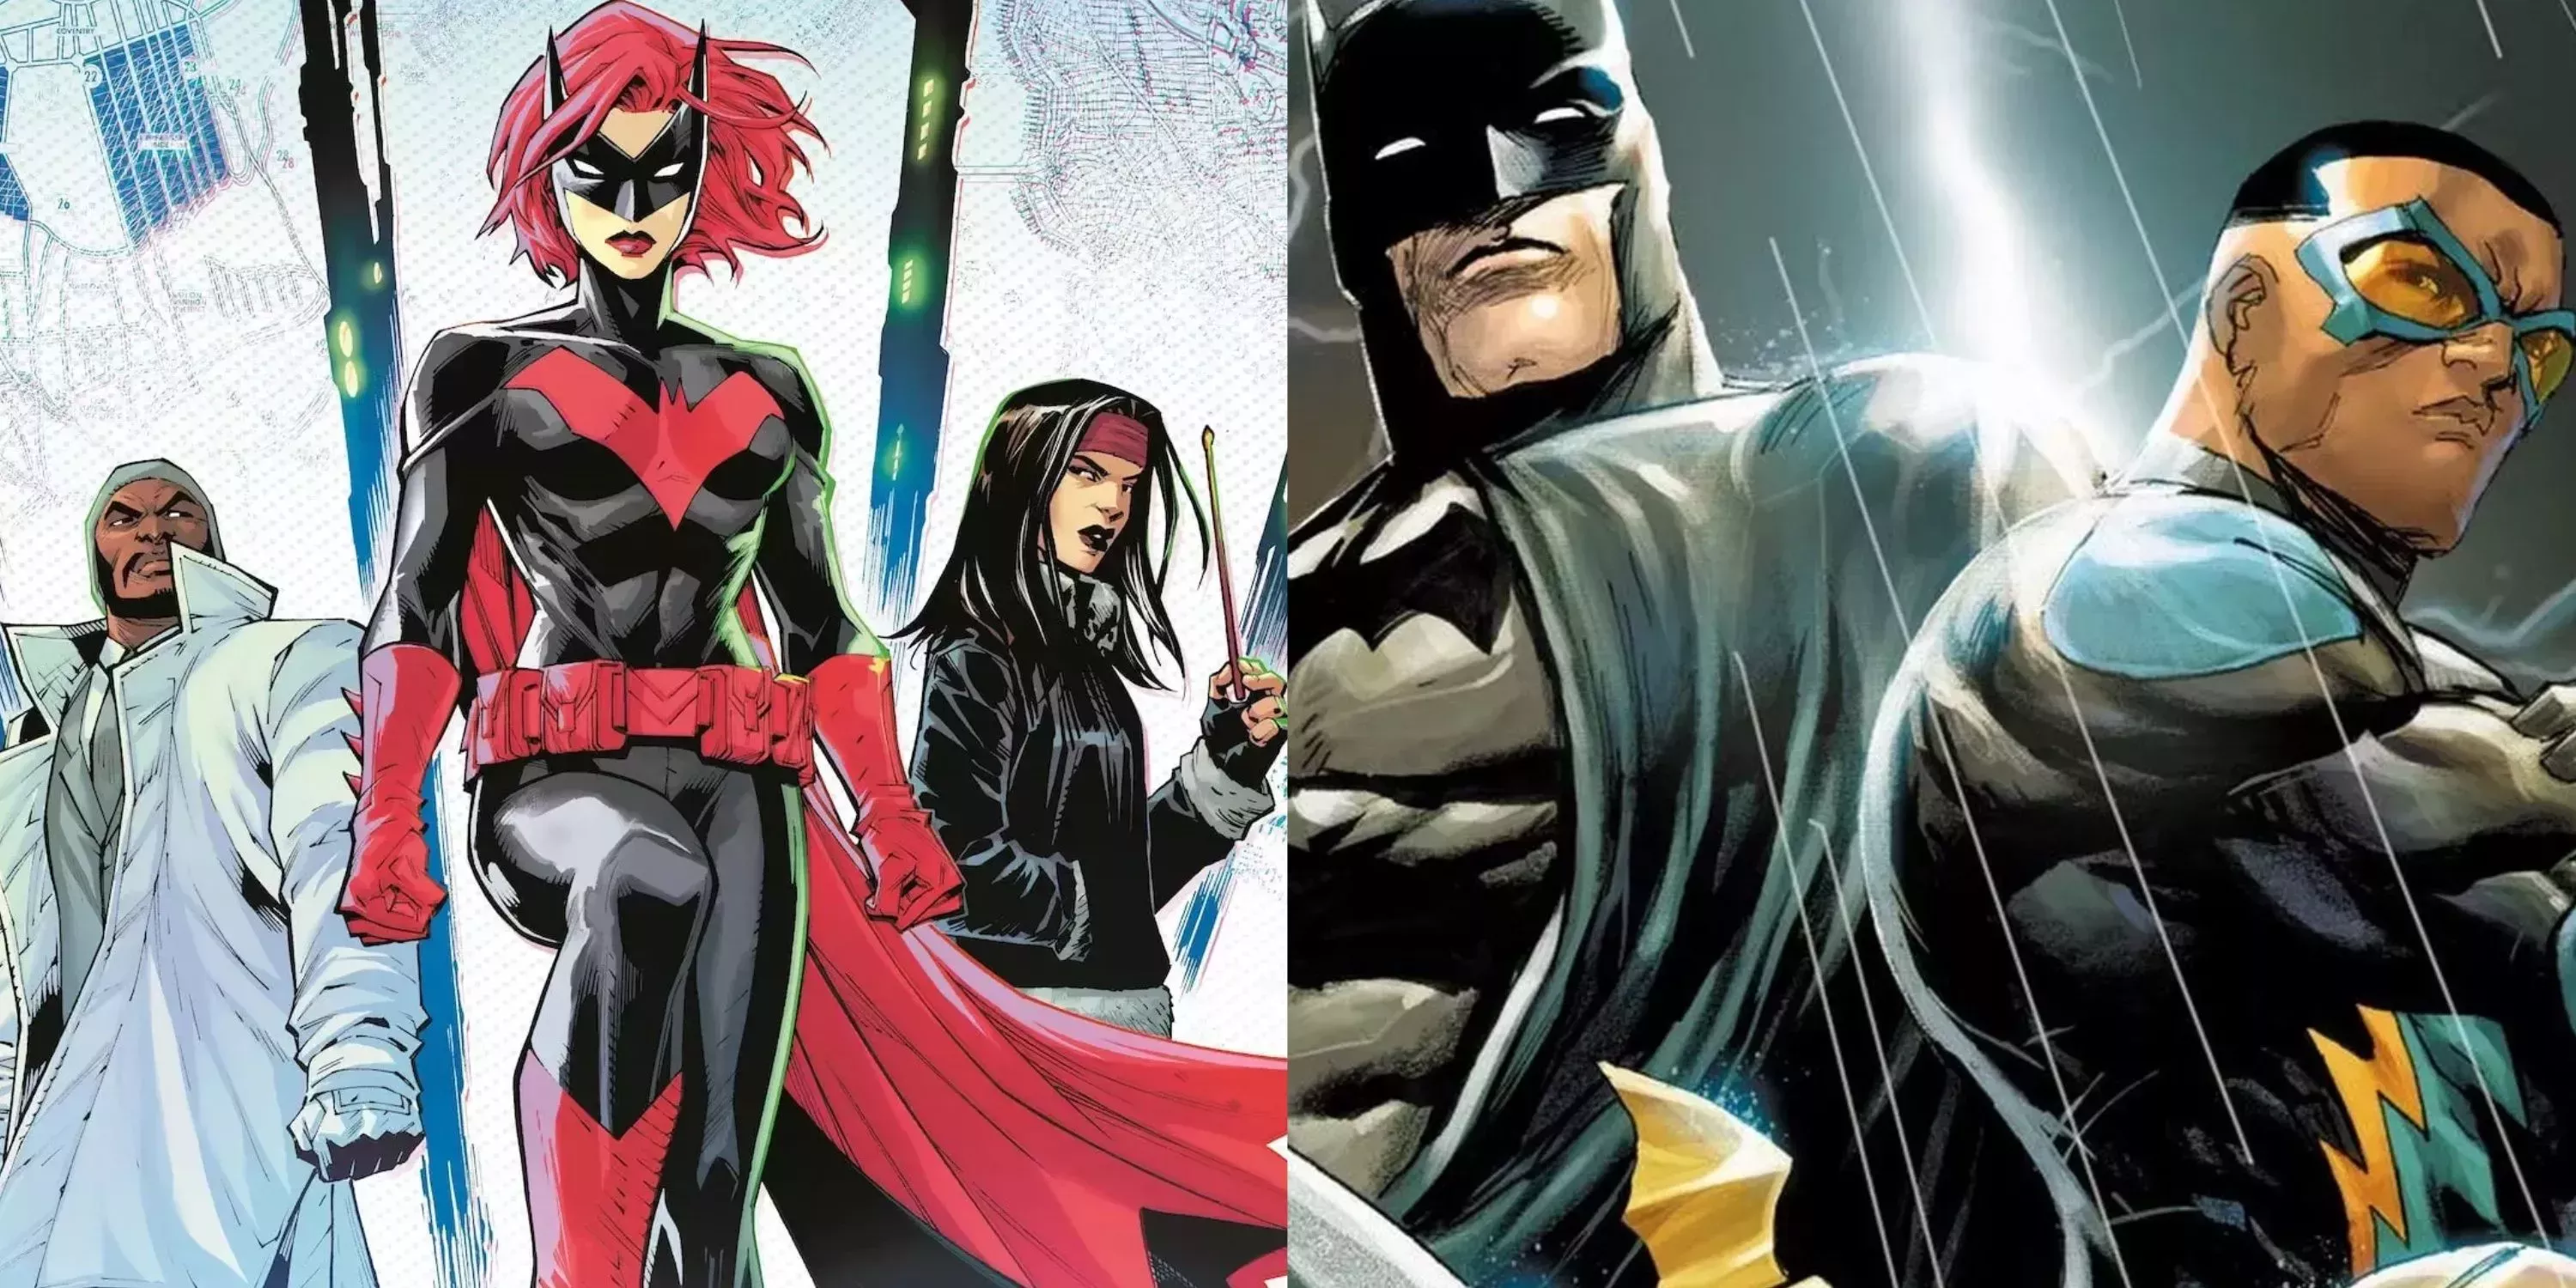 Split image Batman and the Outsiders 2023 and 2019 covers with Batwoman and Black Lightning